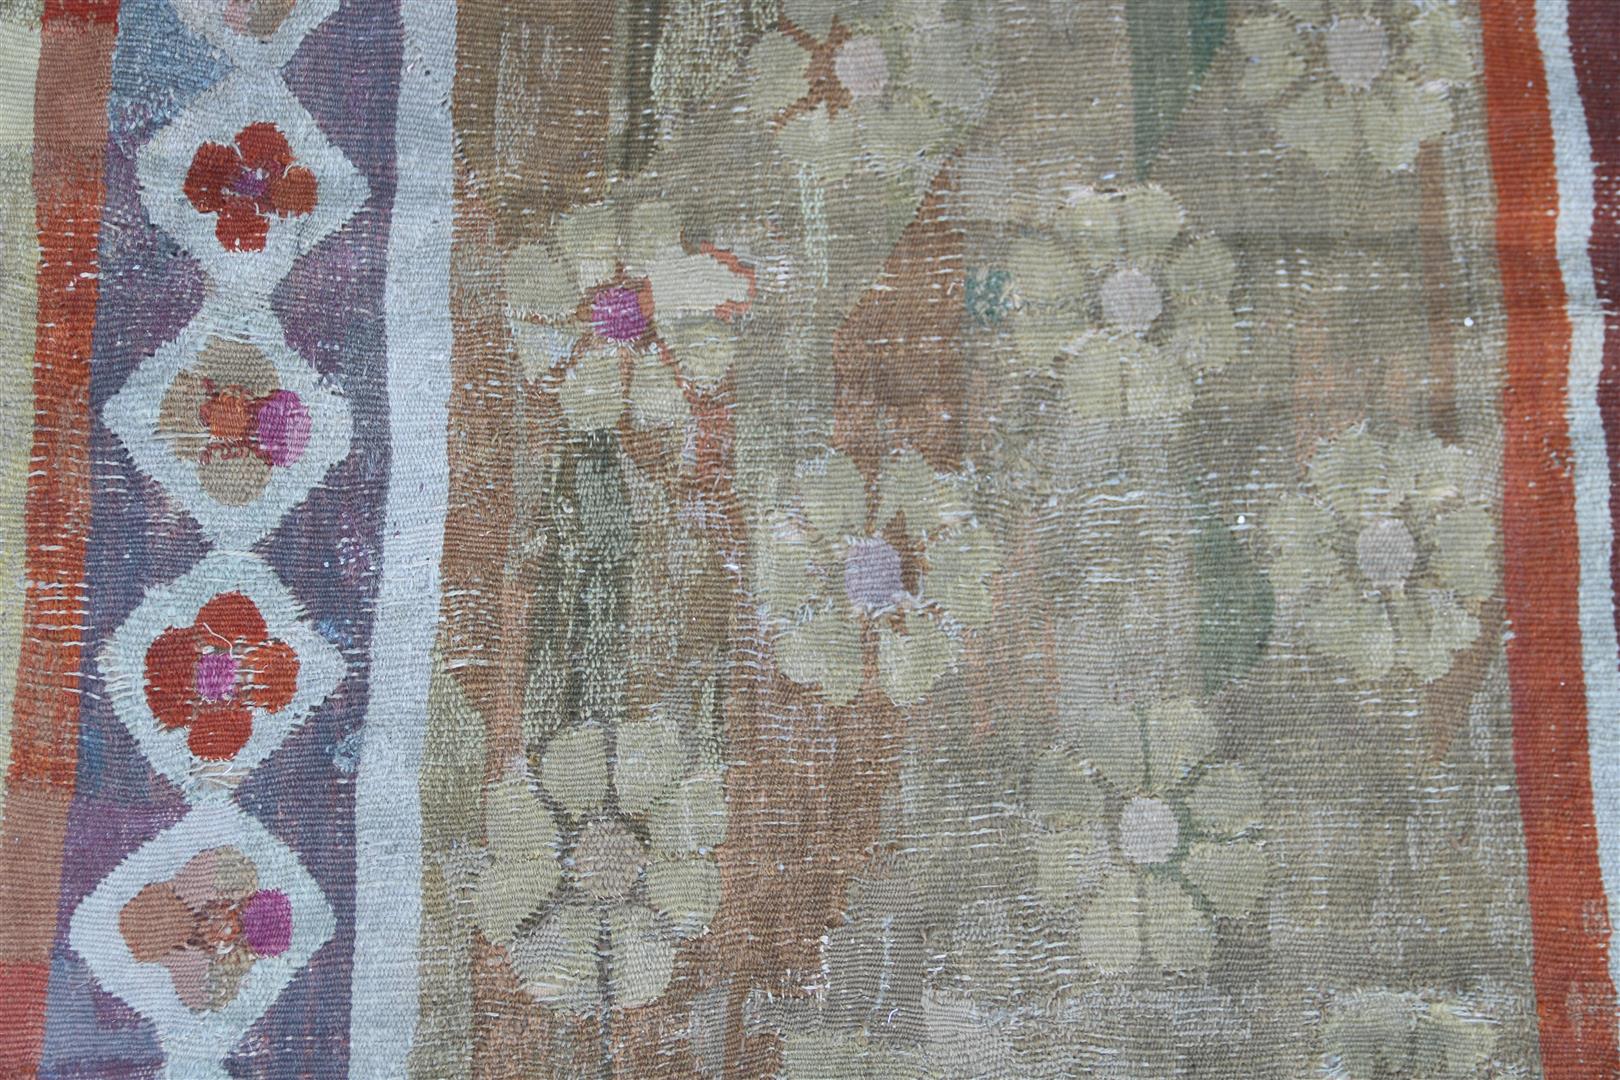 Antique woven tapestry - Image 5 of 10